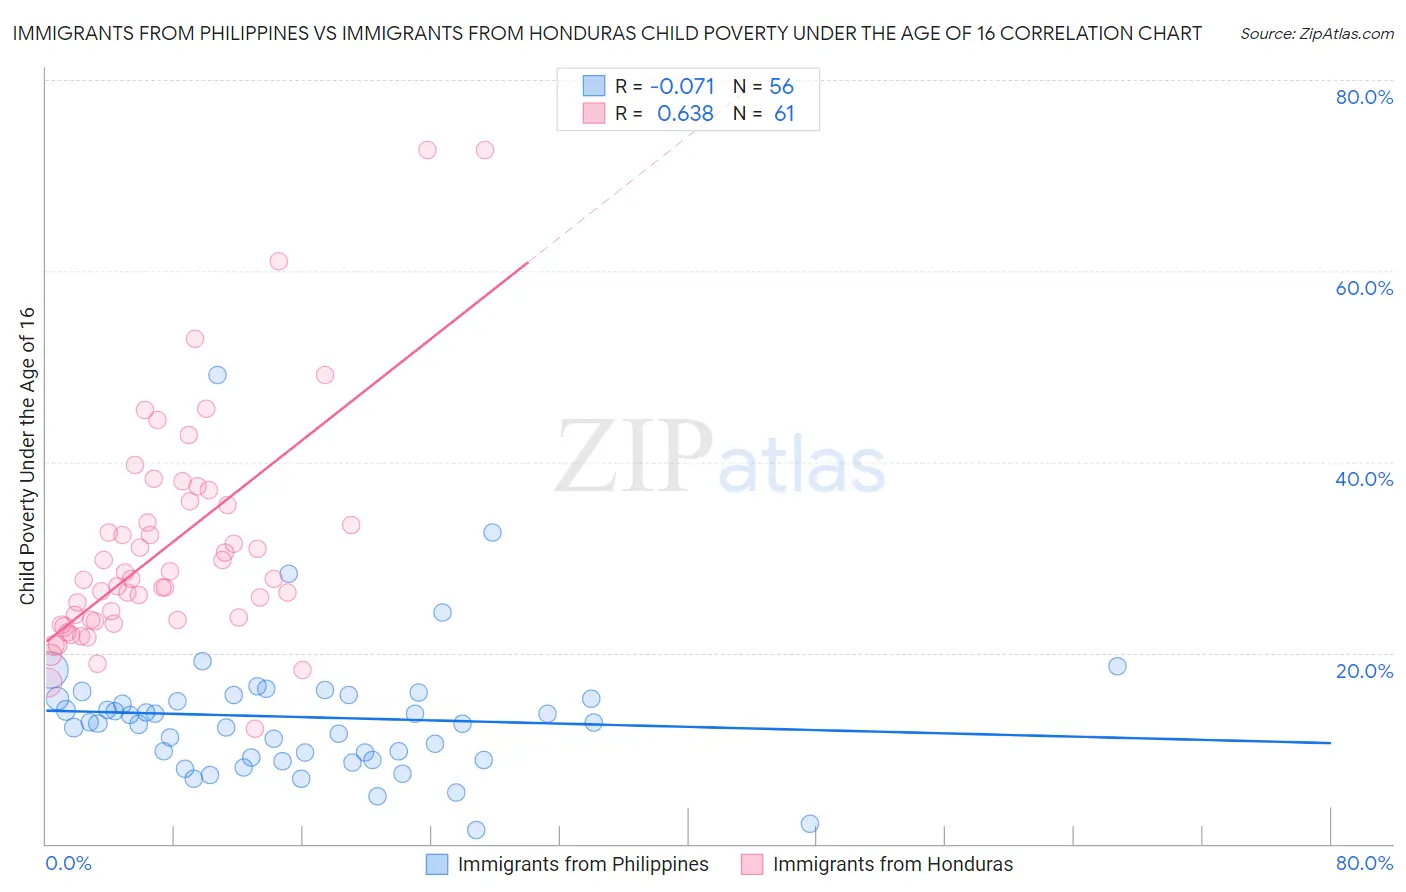 Immigrants from Philippines vs Immigrants from Honduras Child Poverty Under the Age of 16